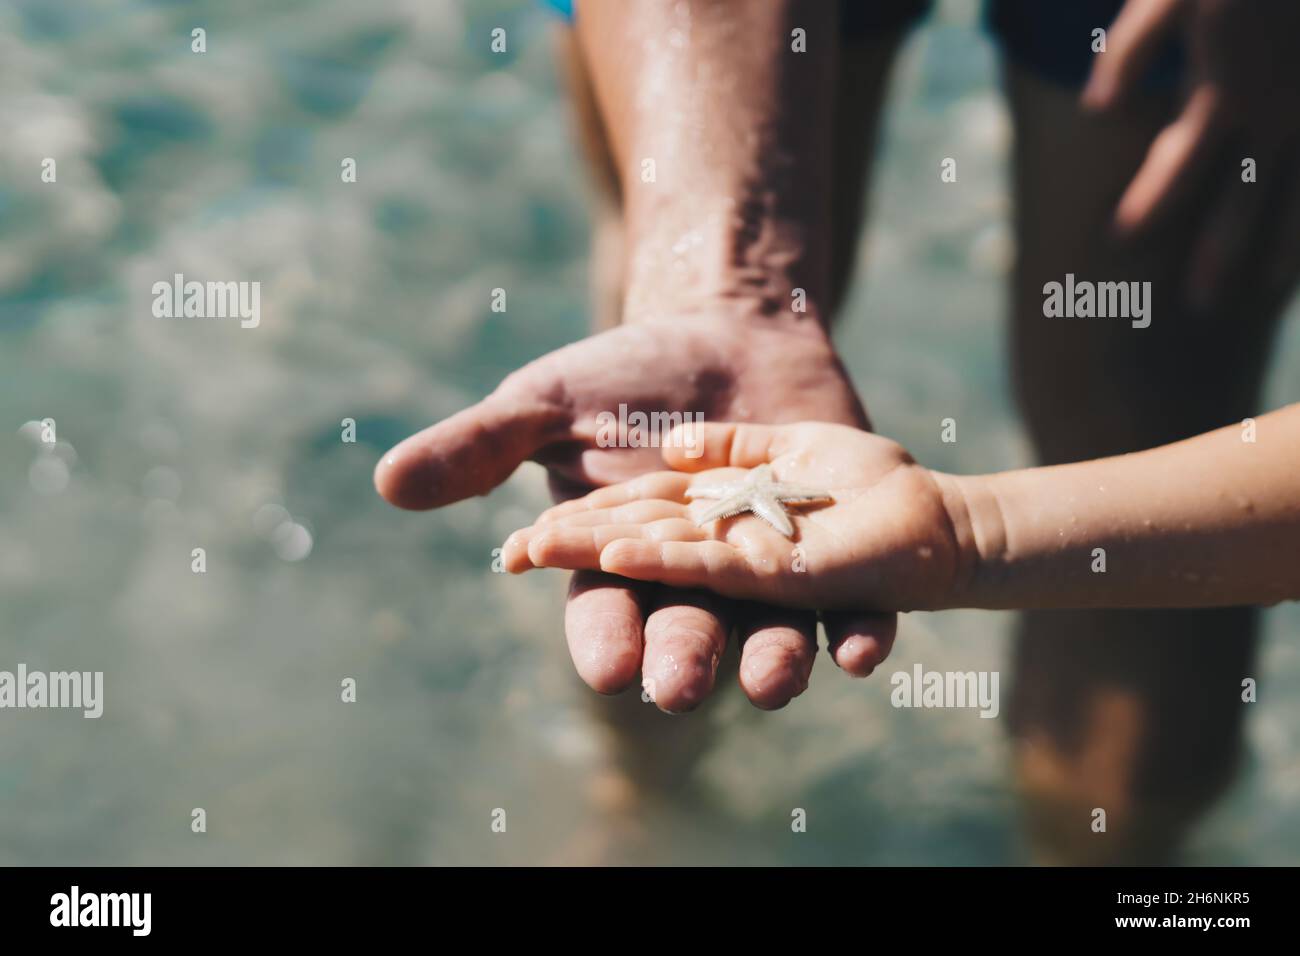 E Father hold son hand. Child show starfish lie on open palm. Close up wet drops skin, thumb finger. Sea tourism, care about marine fauna nature world Stock Photo